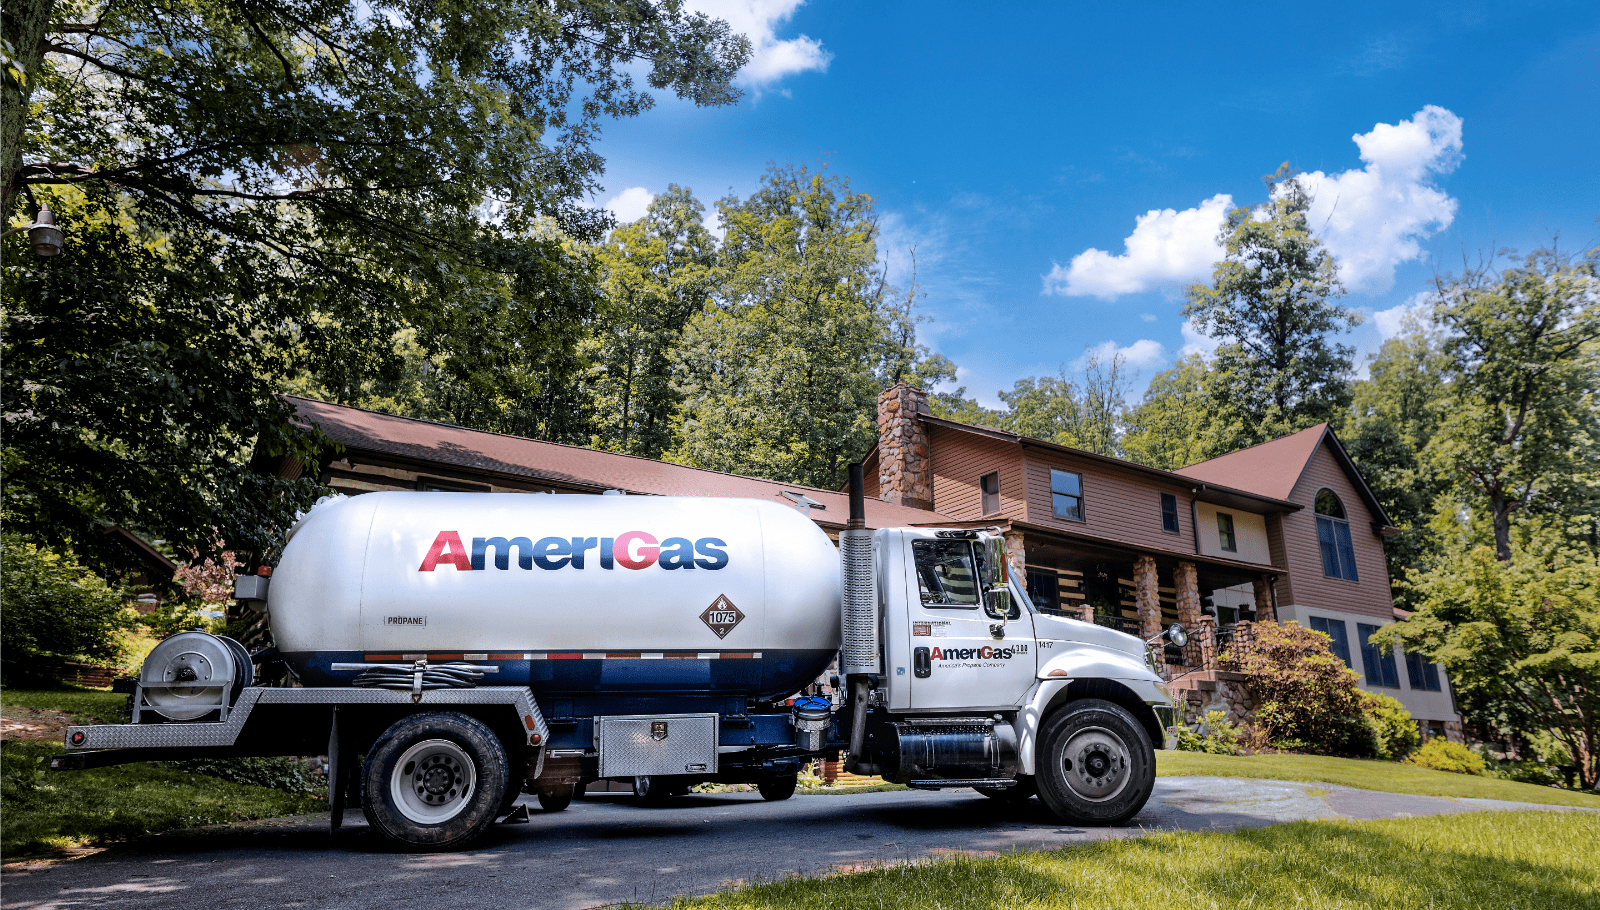 Members of YouDecide save 10 cents per gallon on propane with AmeriGas